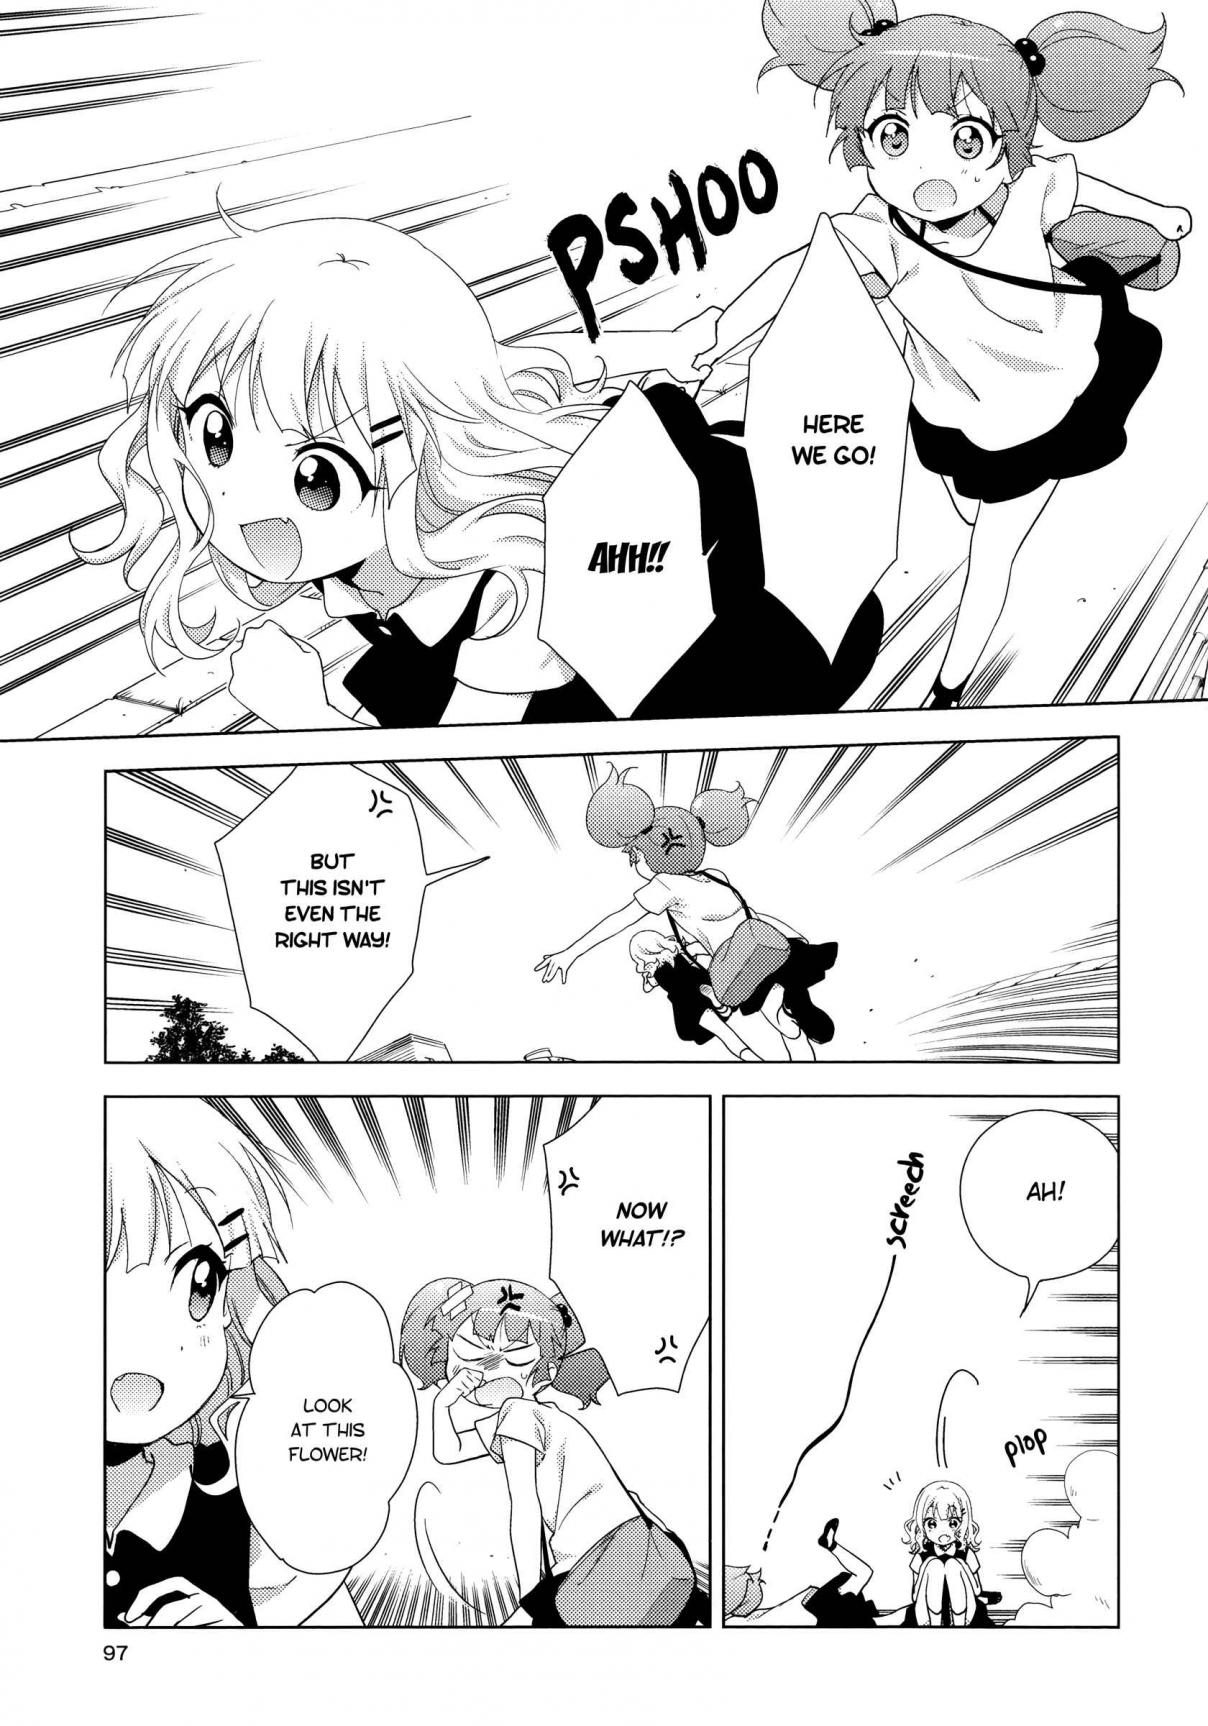 YuruYuri Vol. 16 Ch. 125 We Tried hanging Out. Just the Two of Us.